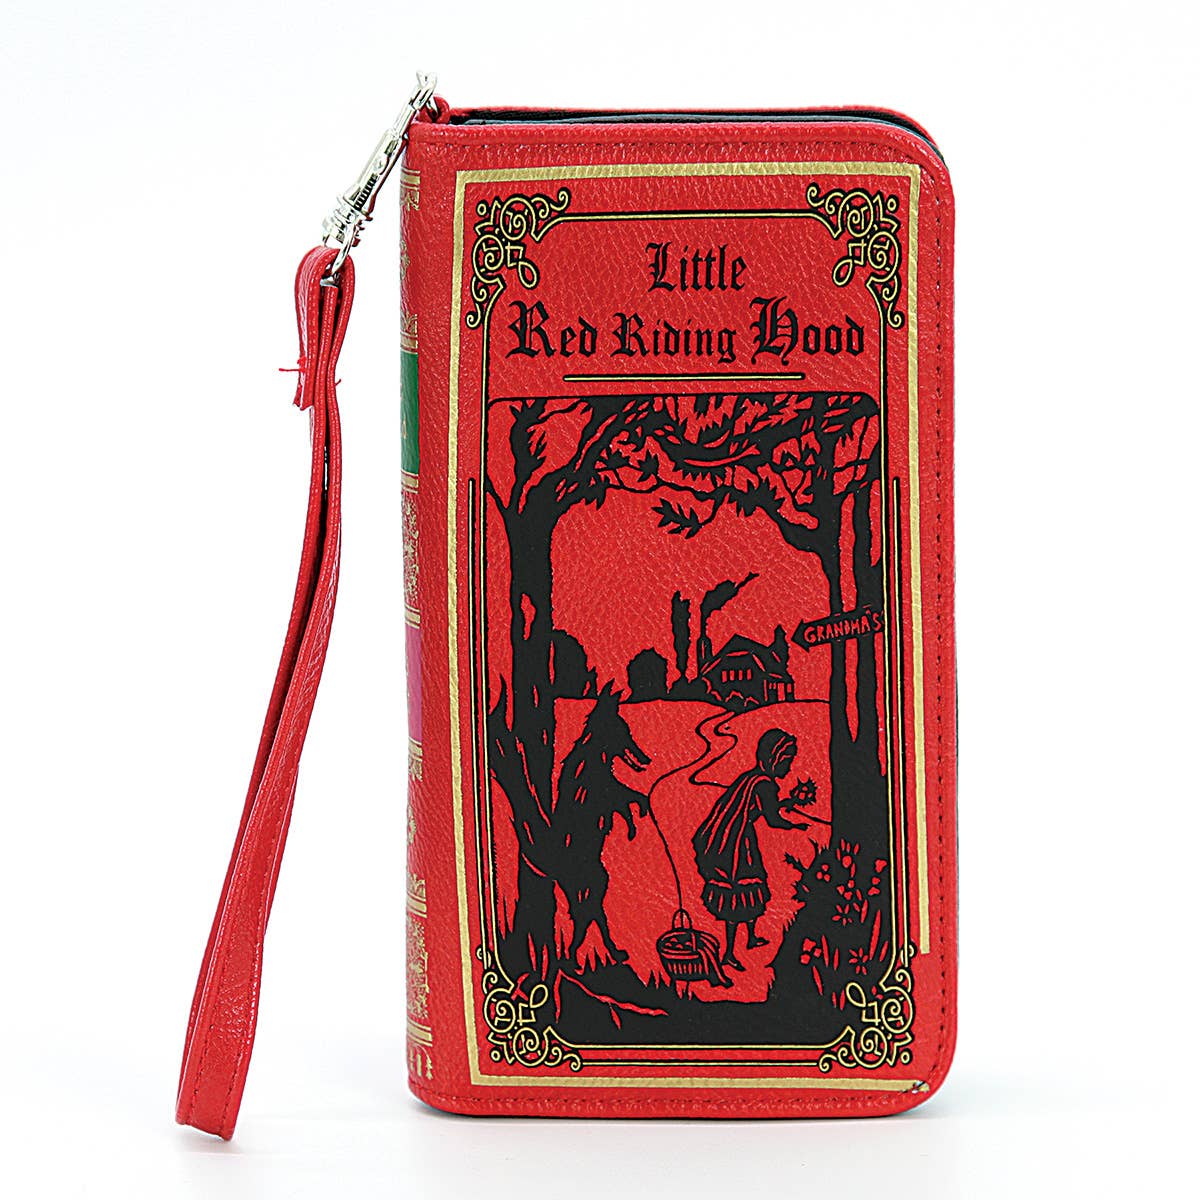 Little Red Riding Hood Story Book Vinyl Red Wallet